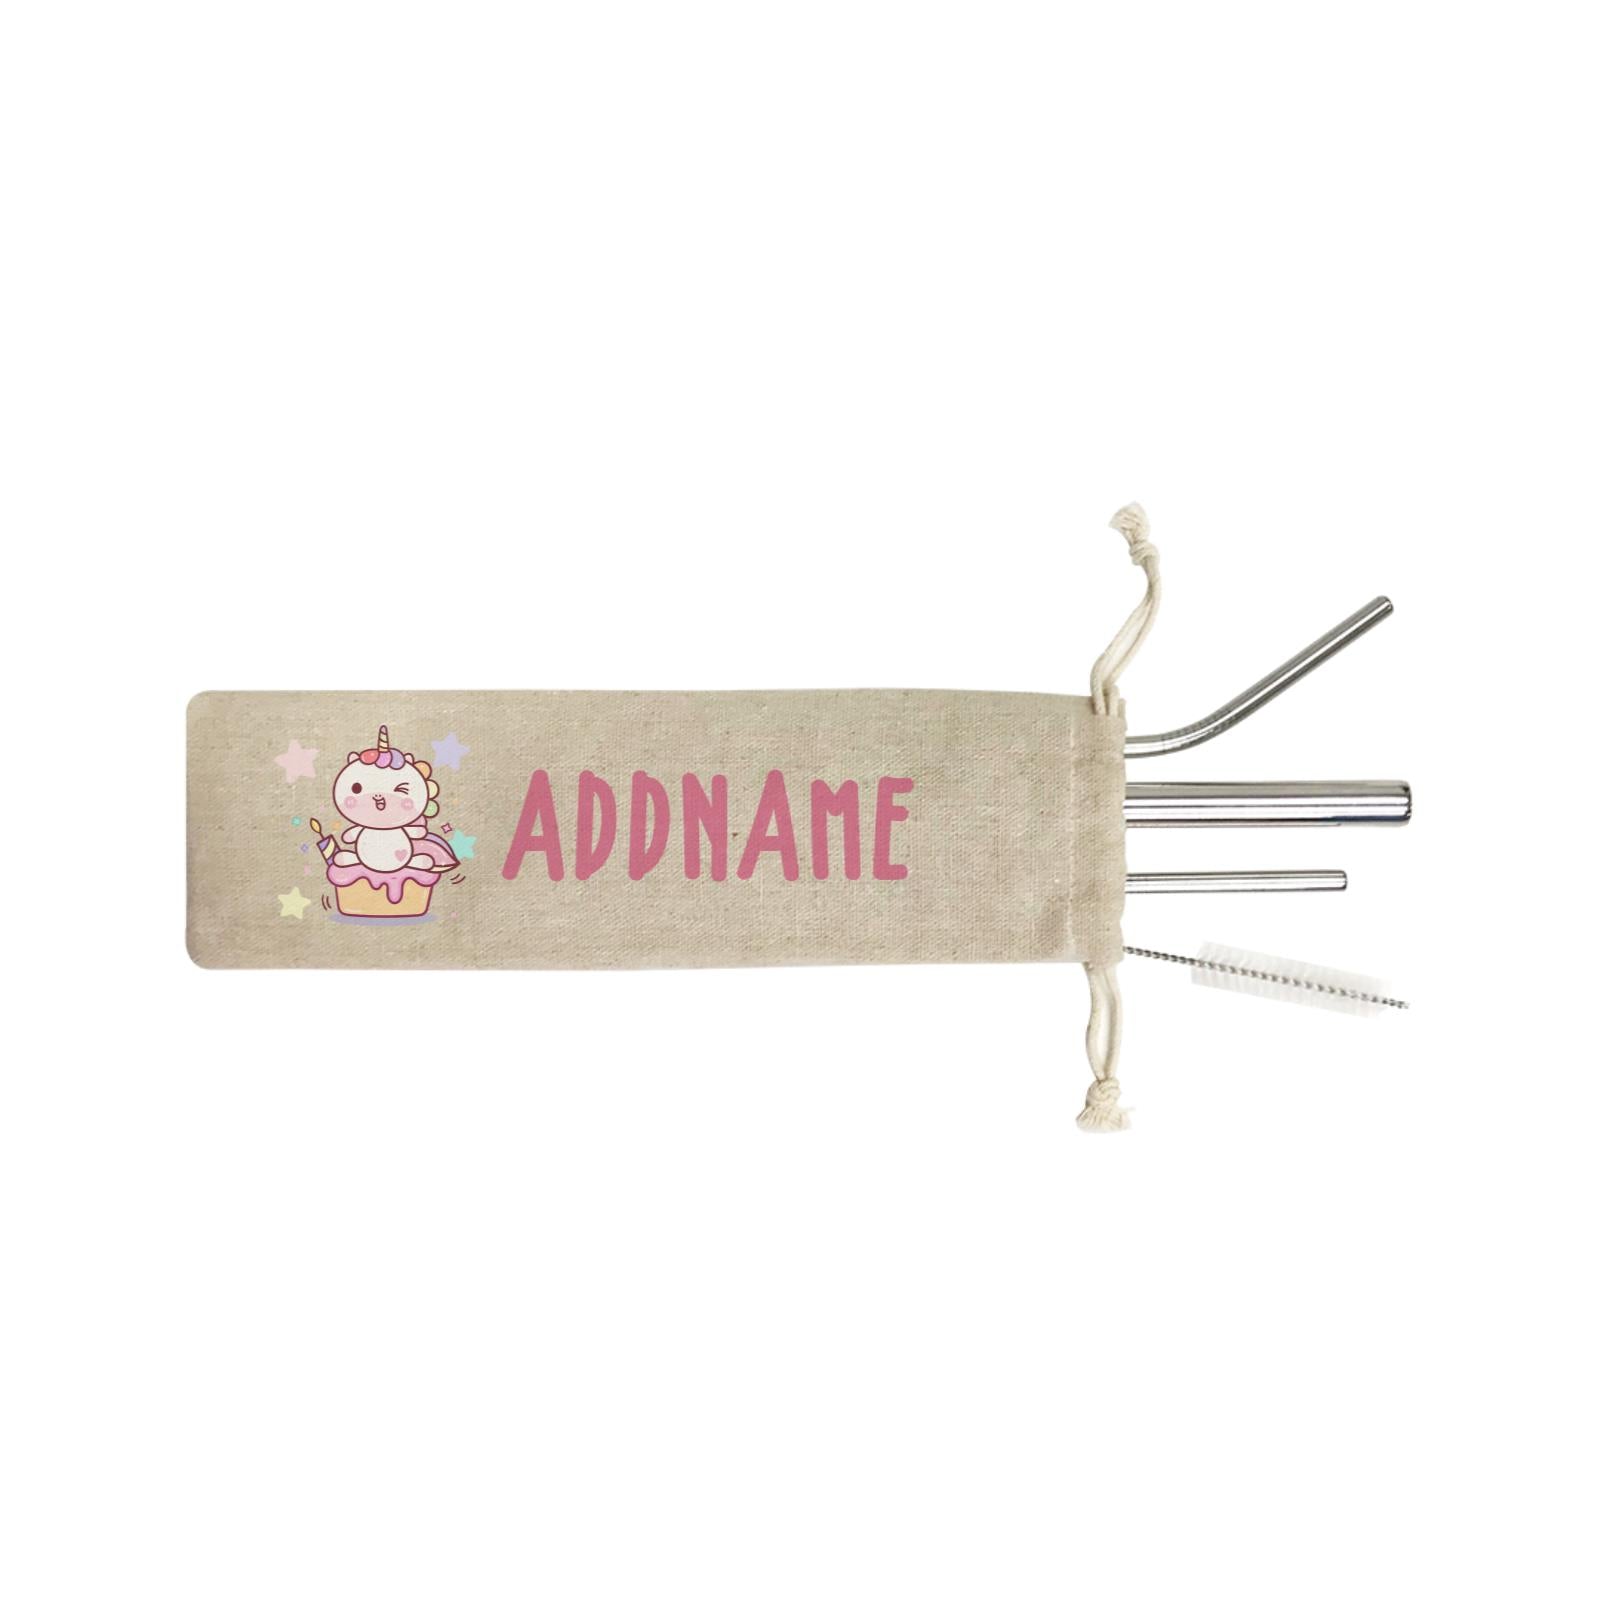 Unicorn And Princess Series Cute Unicorn Birthday Cupcake Addname SB 4-In-1 Stainless Steel Straw Set in Satchel